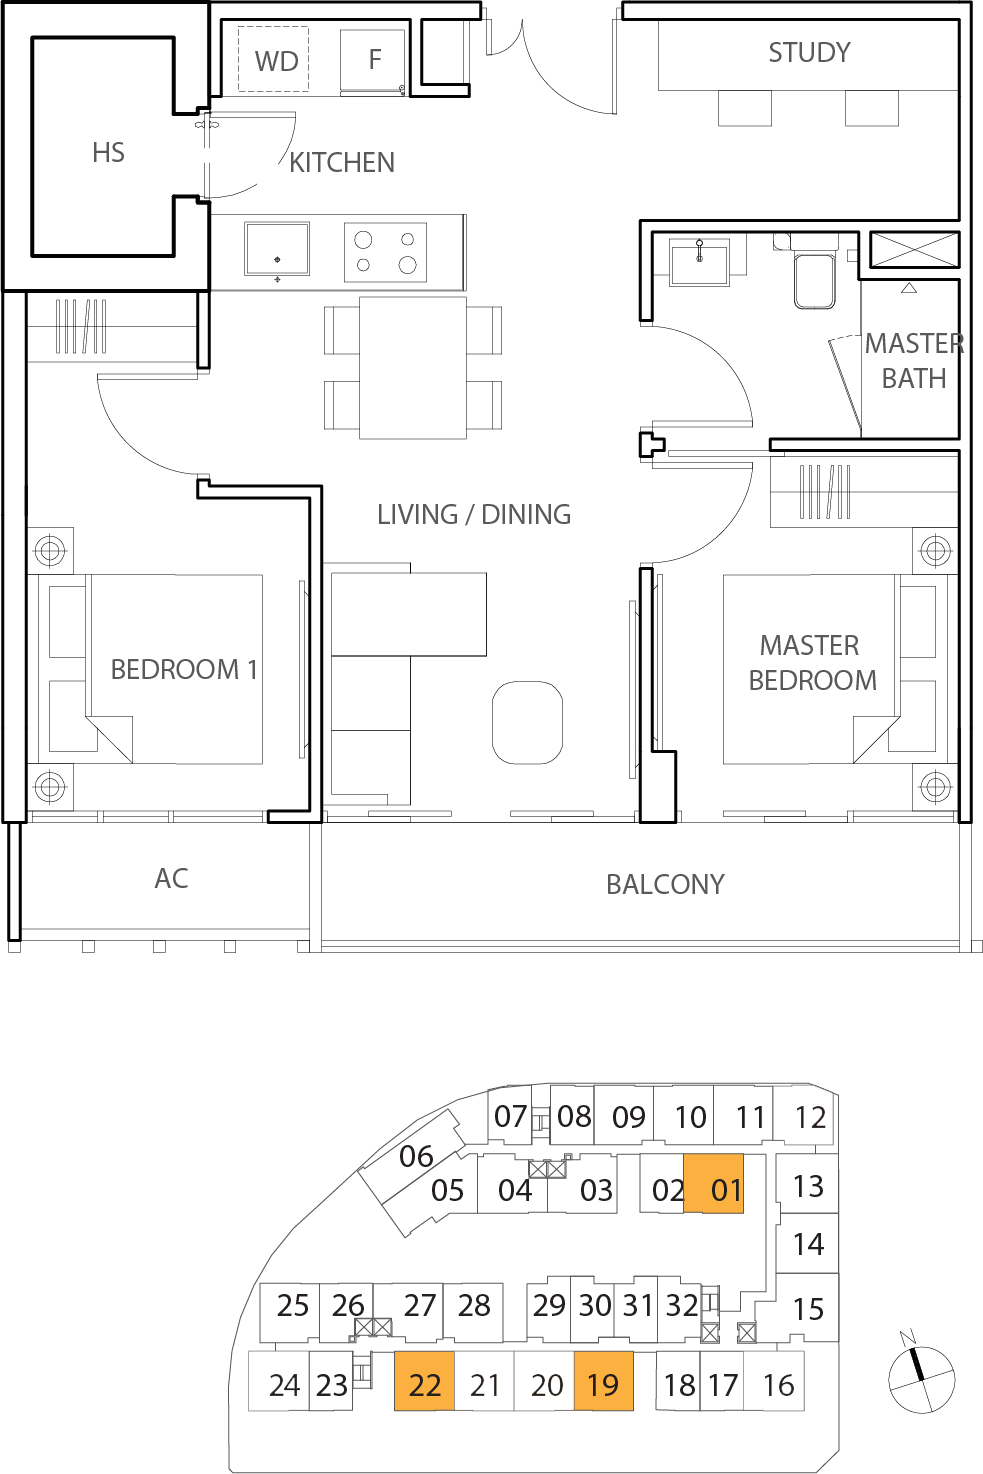 Floor Plan for Residential Type B5-a